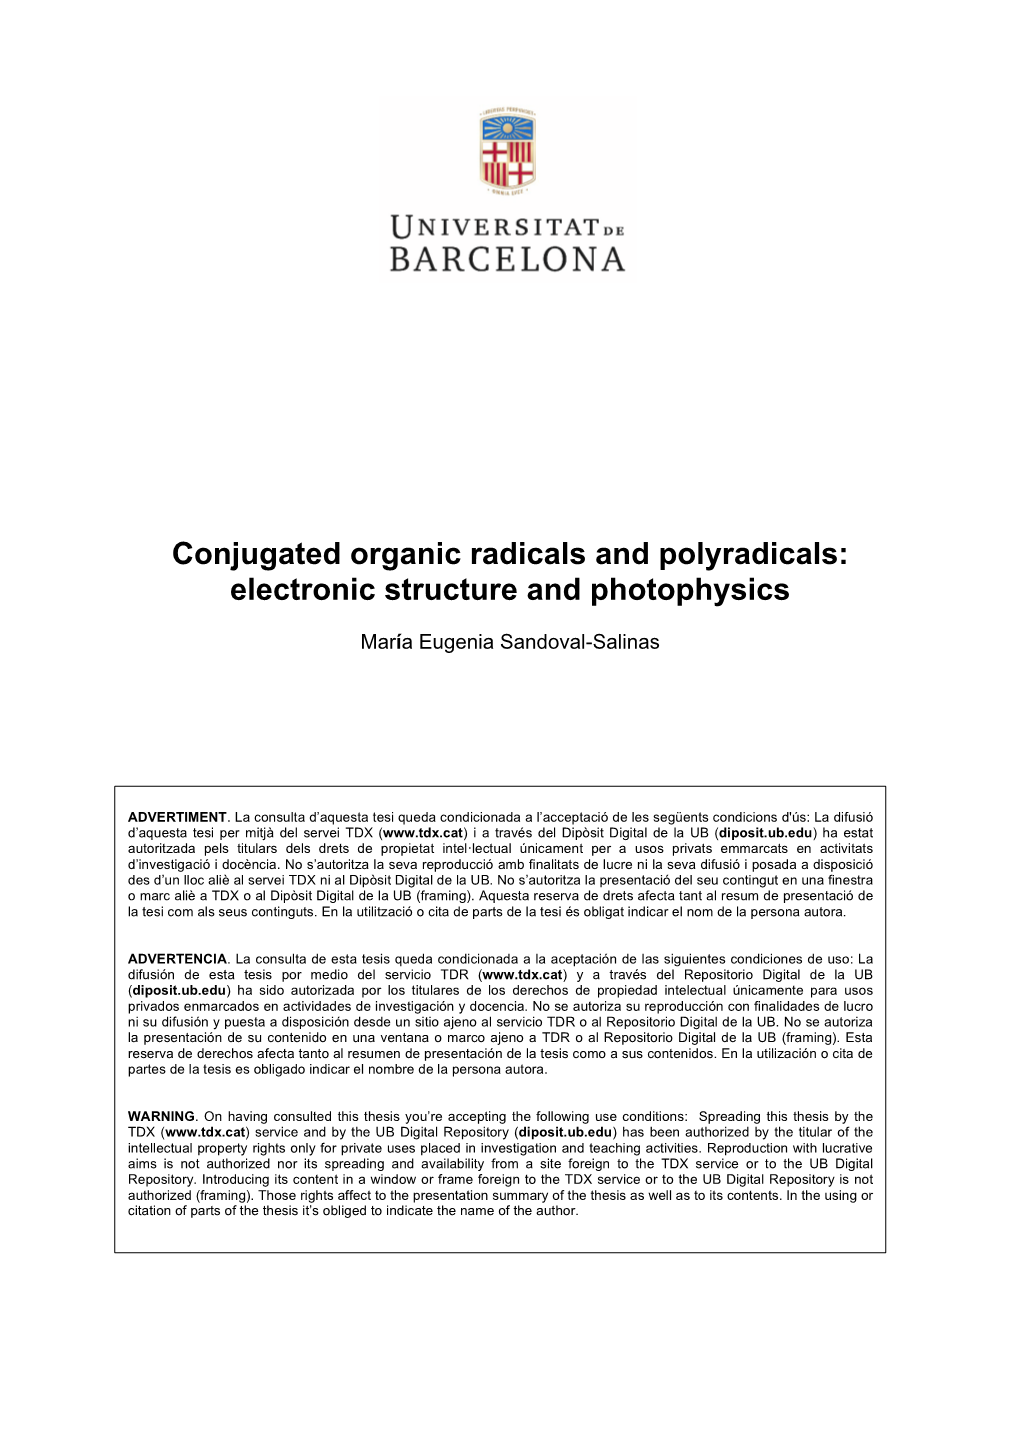 Conjugated Organic Radicals and Polyradicals: Electronic Structure and Photophysics